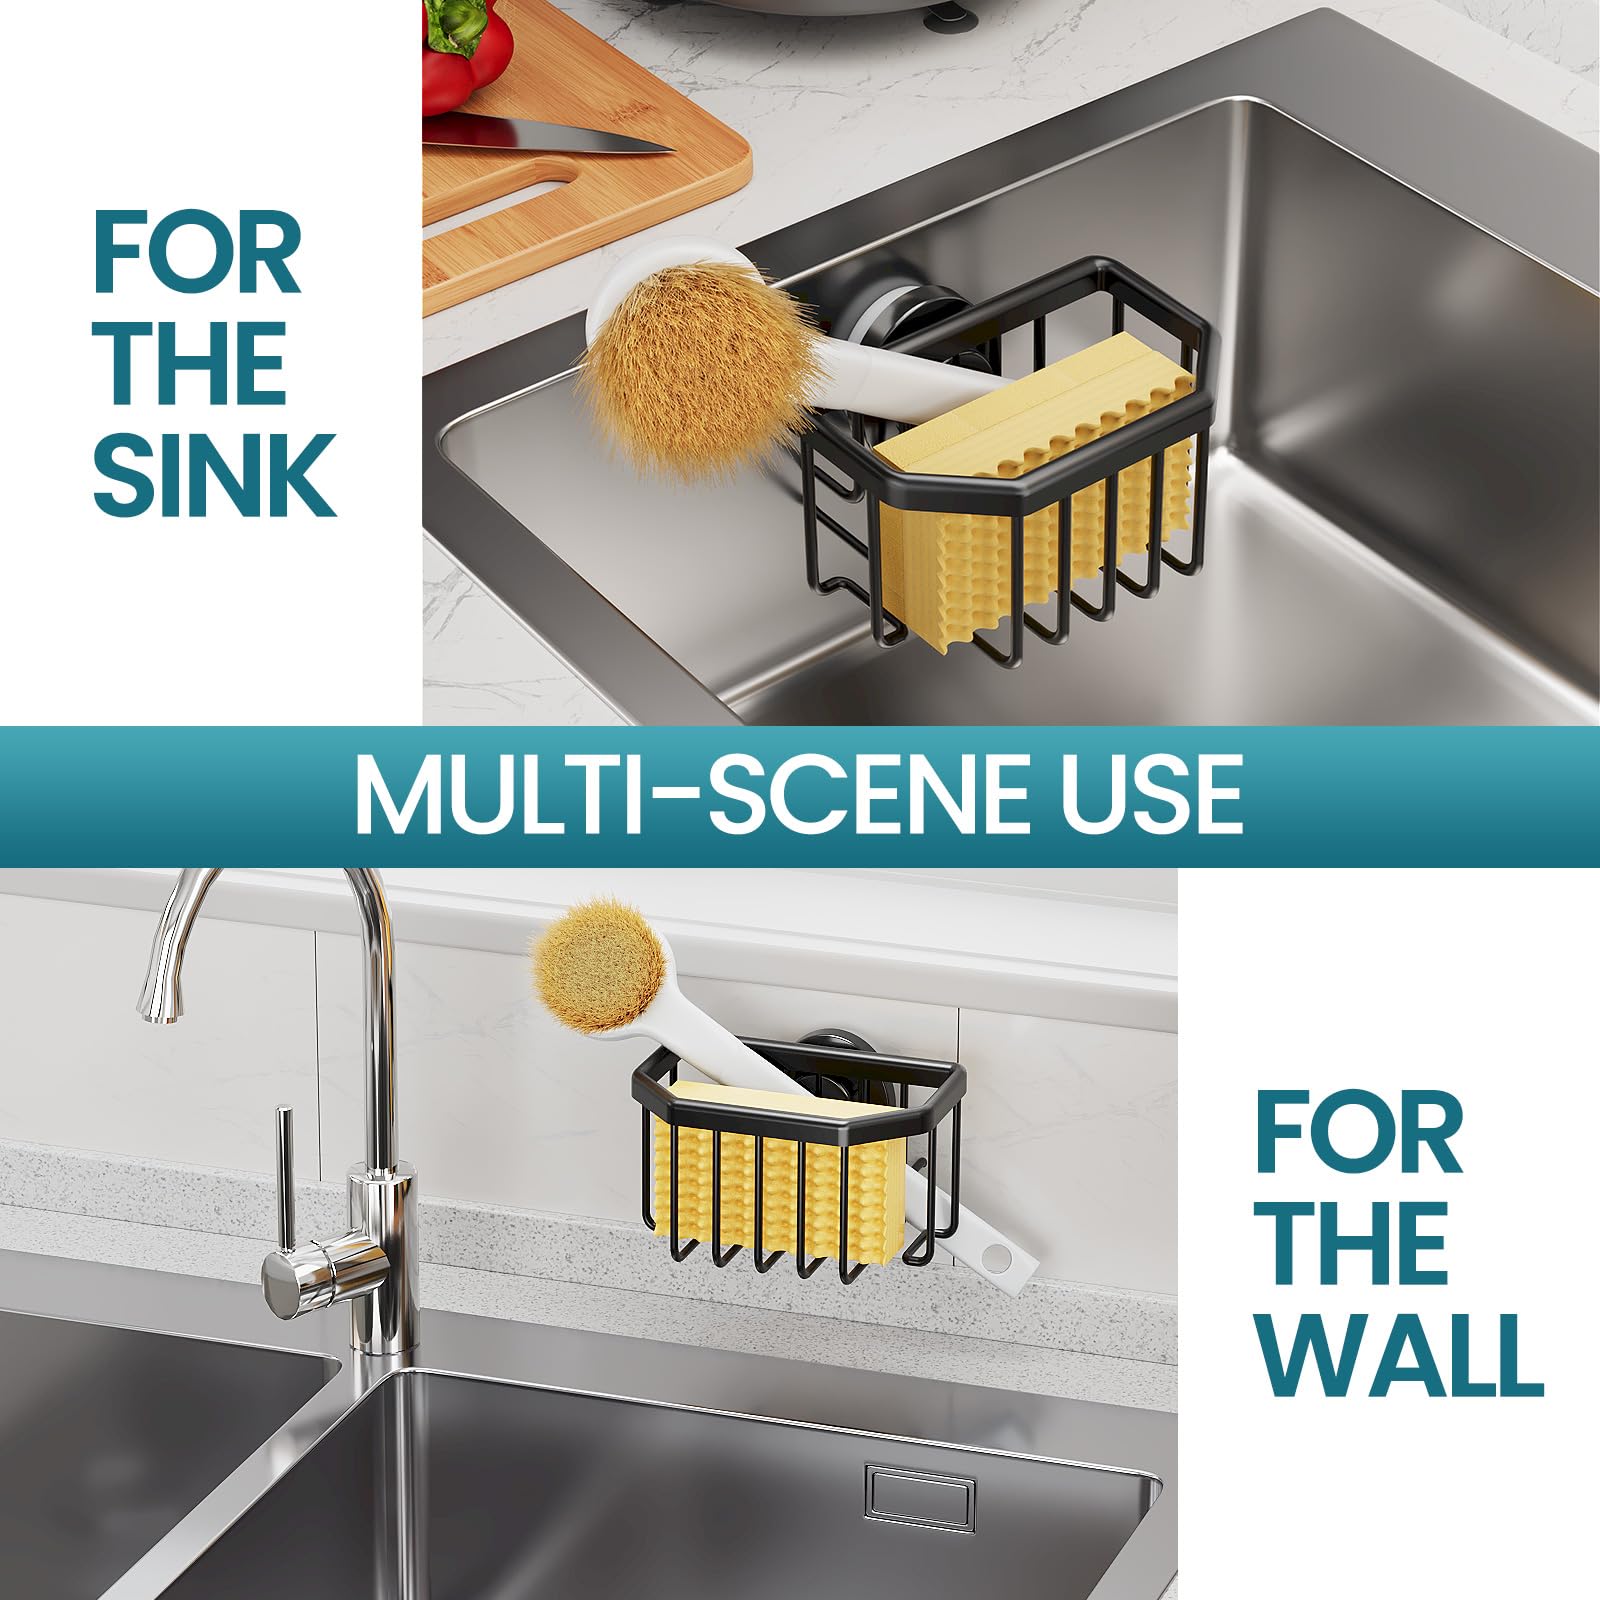 TAILI Sponge Holder with Strong Suction Cup, Dish Sponge Caddy Inside Sink Removable, Rustproof Aluminum for Sponges, Brushes, Stoppers and Scrapers - Black